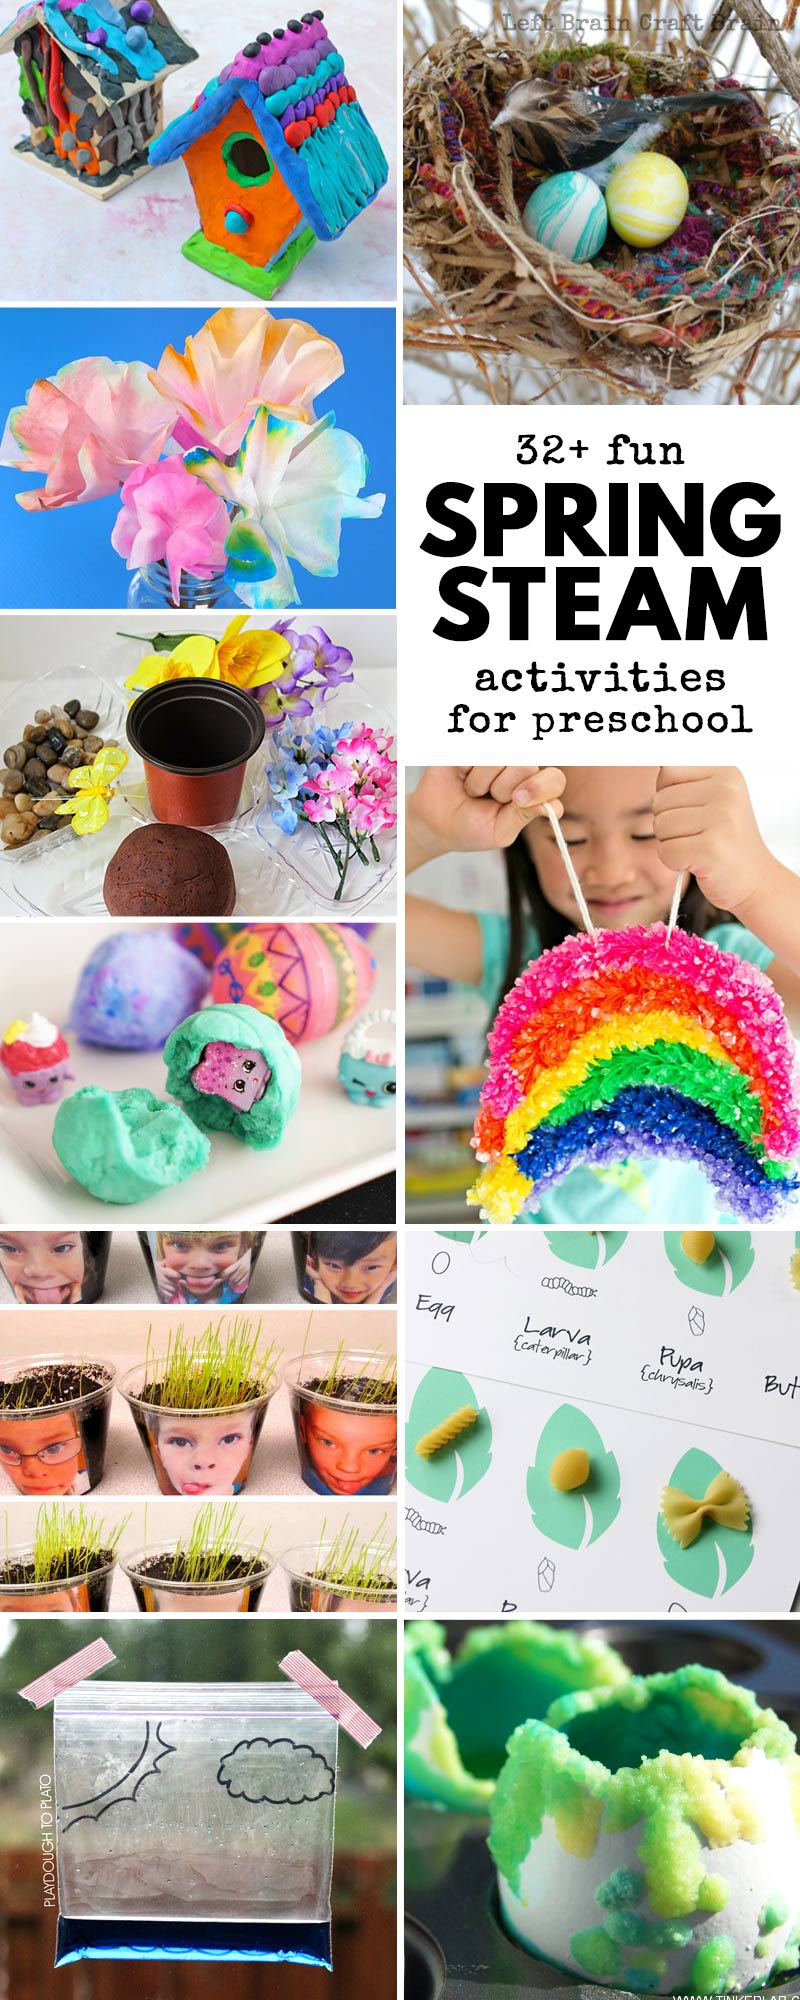 Learn this spring with STEAM! Tons of garden, Easter, weather, birds & butterfly Science, Technology, Engineering, Art & Math activities for preschoolers.